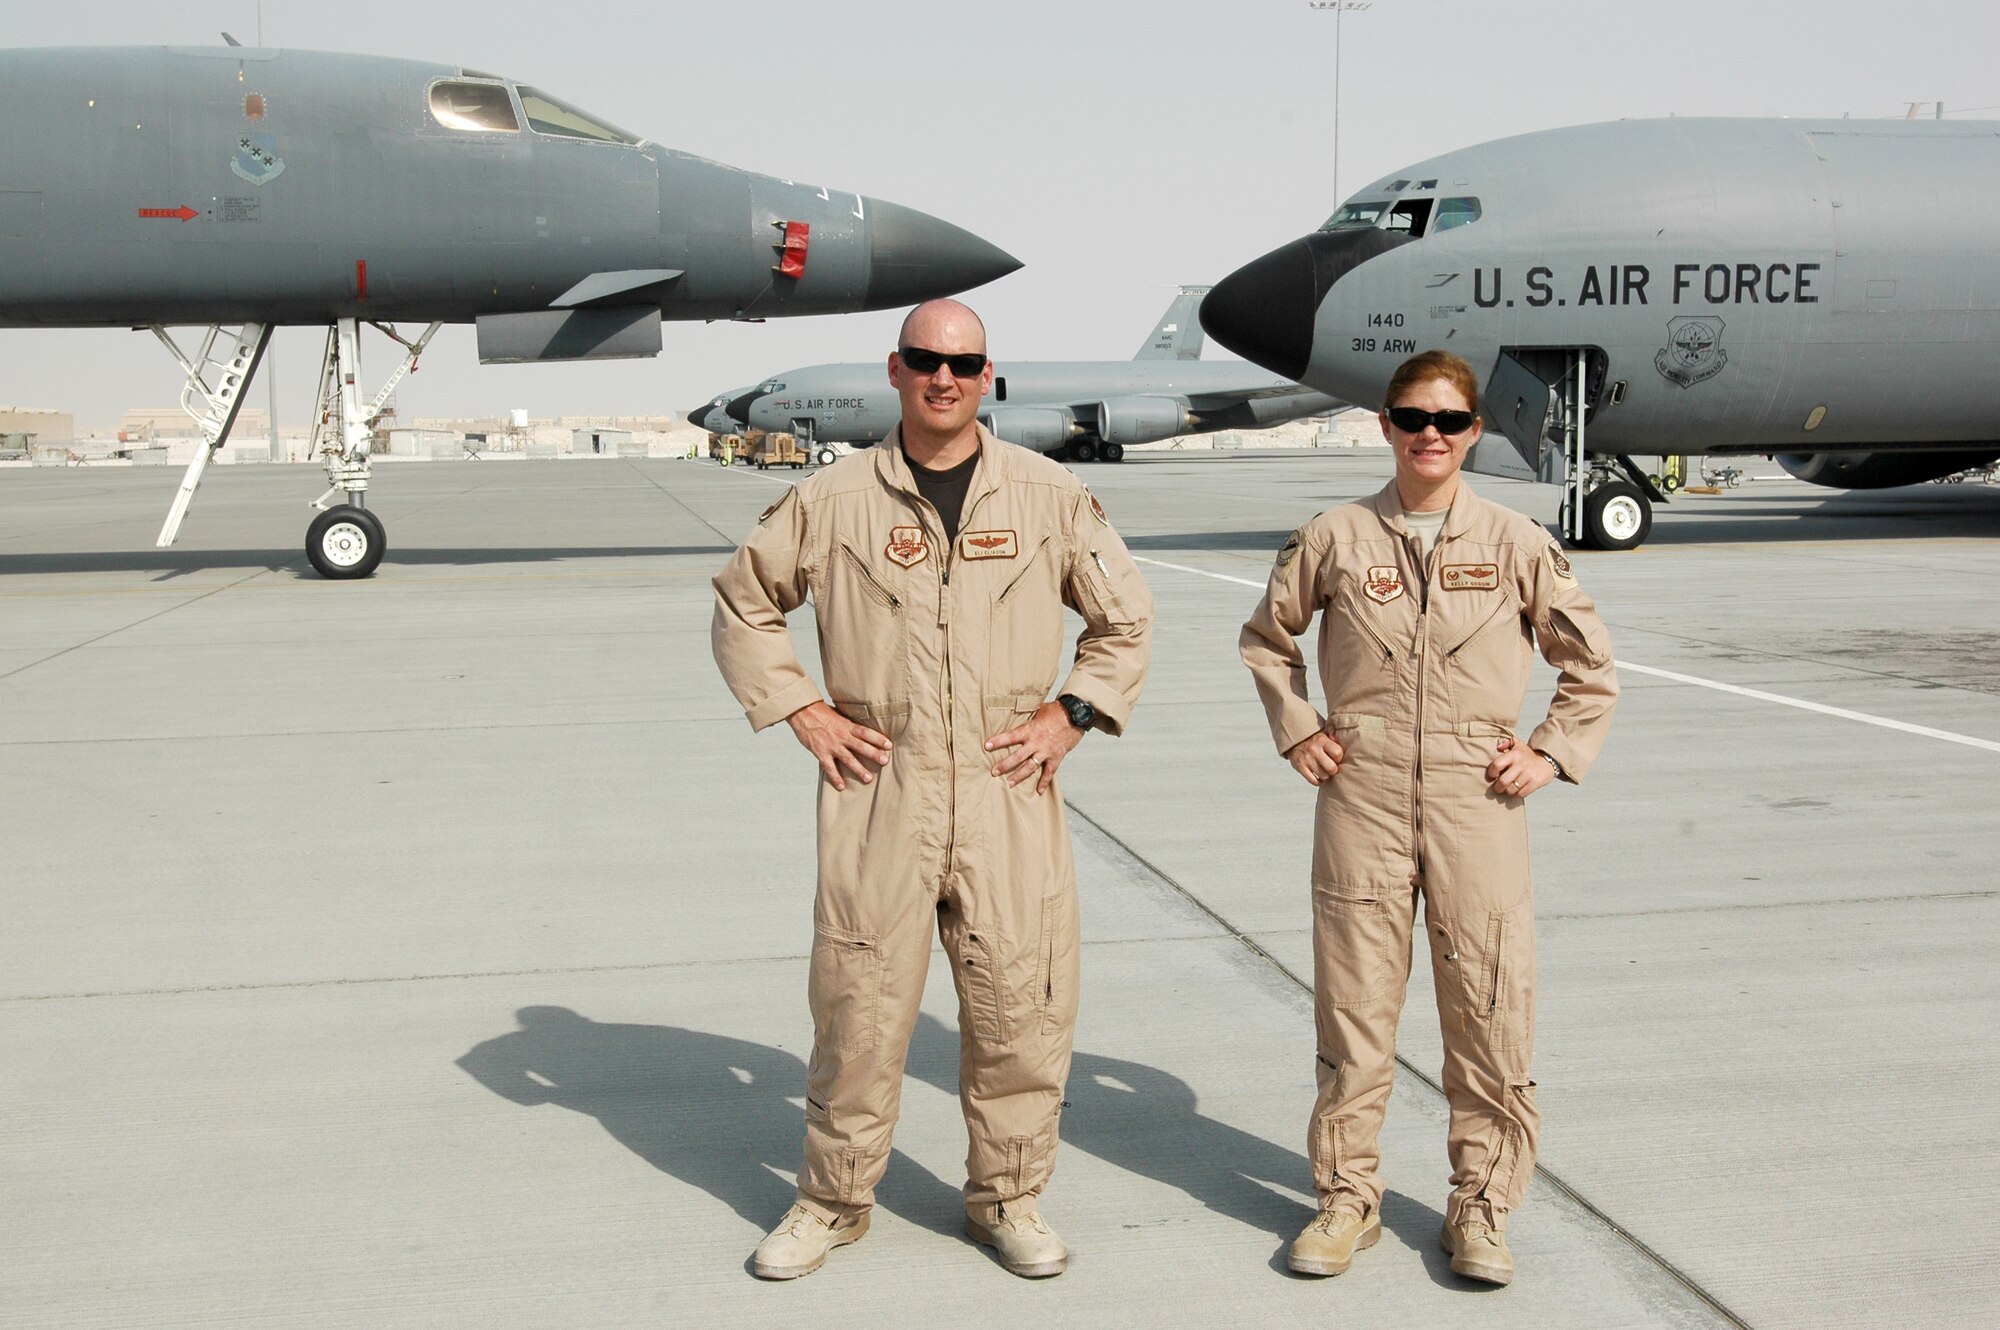 Cadets to commanders: Lt. Col. Michael Eliason (left) and Lt. Col. Kelly Goggin command the bomber and tanker squadrons here. During the last few months, the 9th EBS  has dropped more than 400 bombs. The 340th EARS has refueled more than 13,000 aircraft, providing more than 172,000 million pounds of fuel. (U.S. Air Force photo by Senior Airman Clark Staehle)